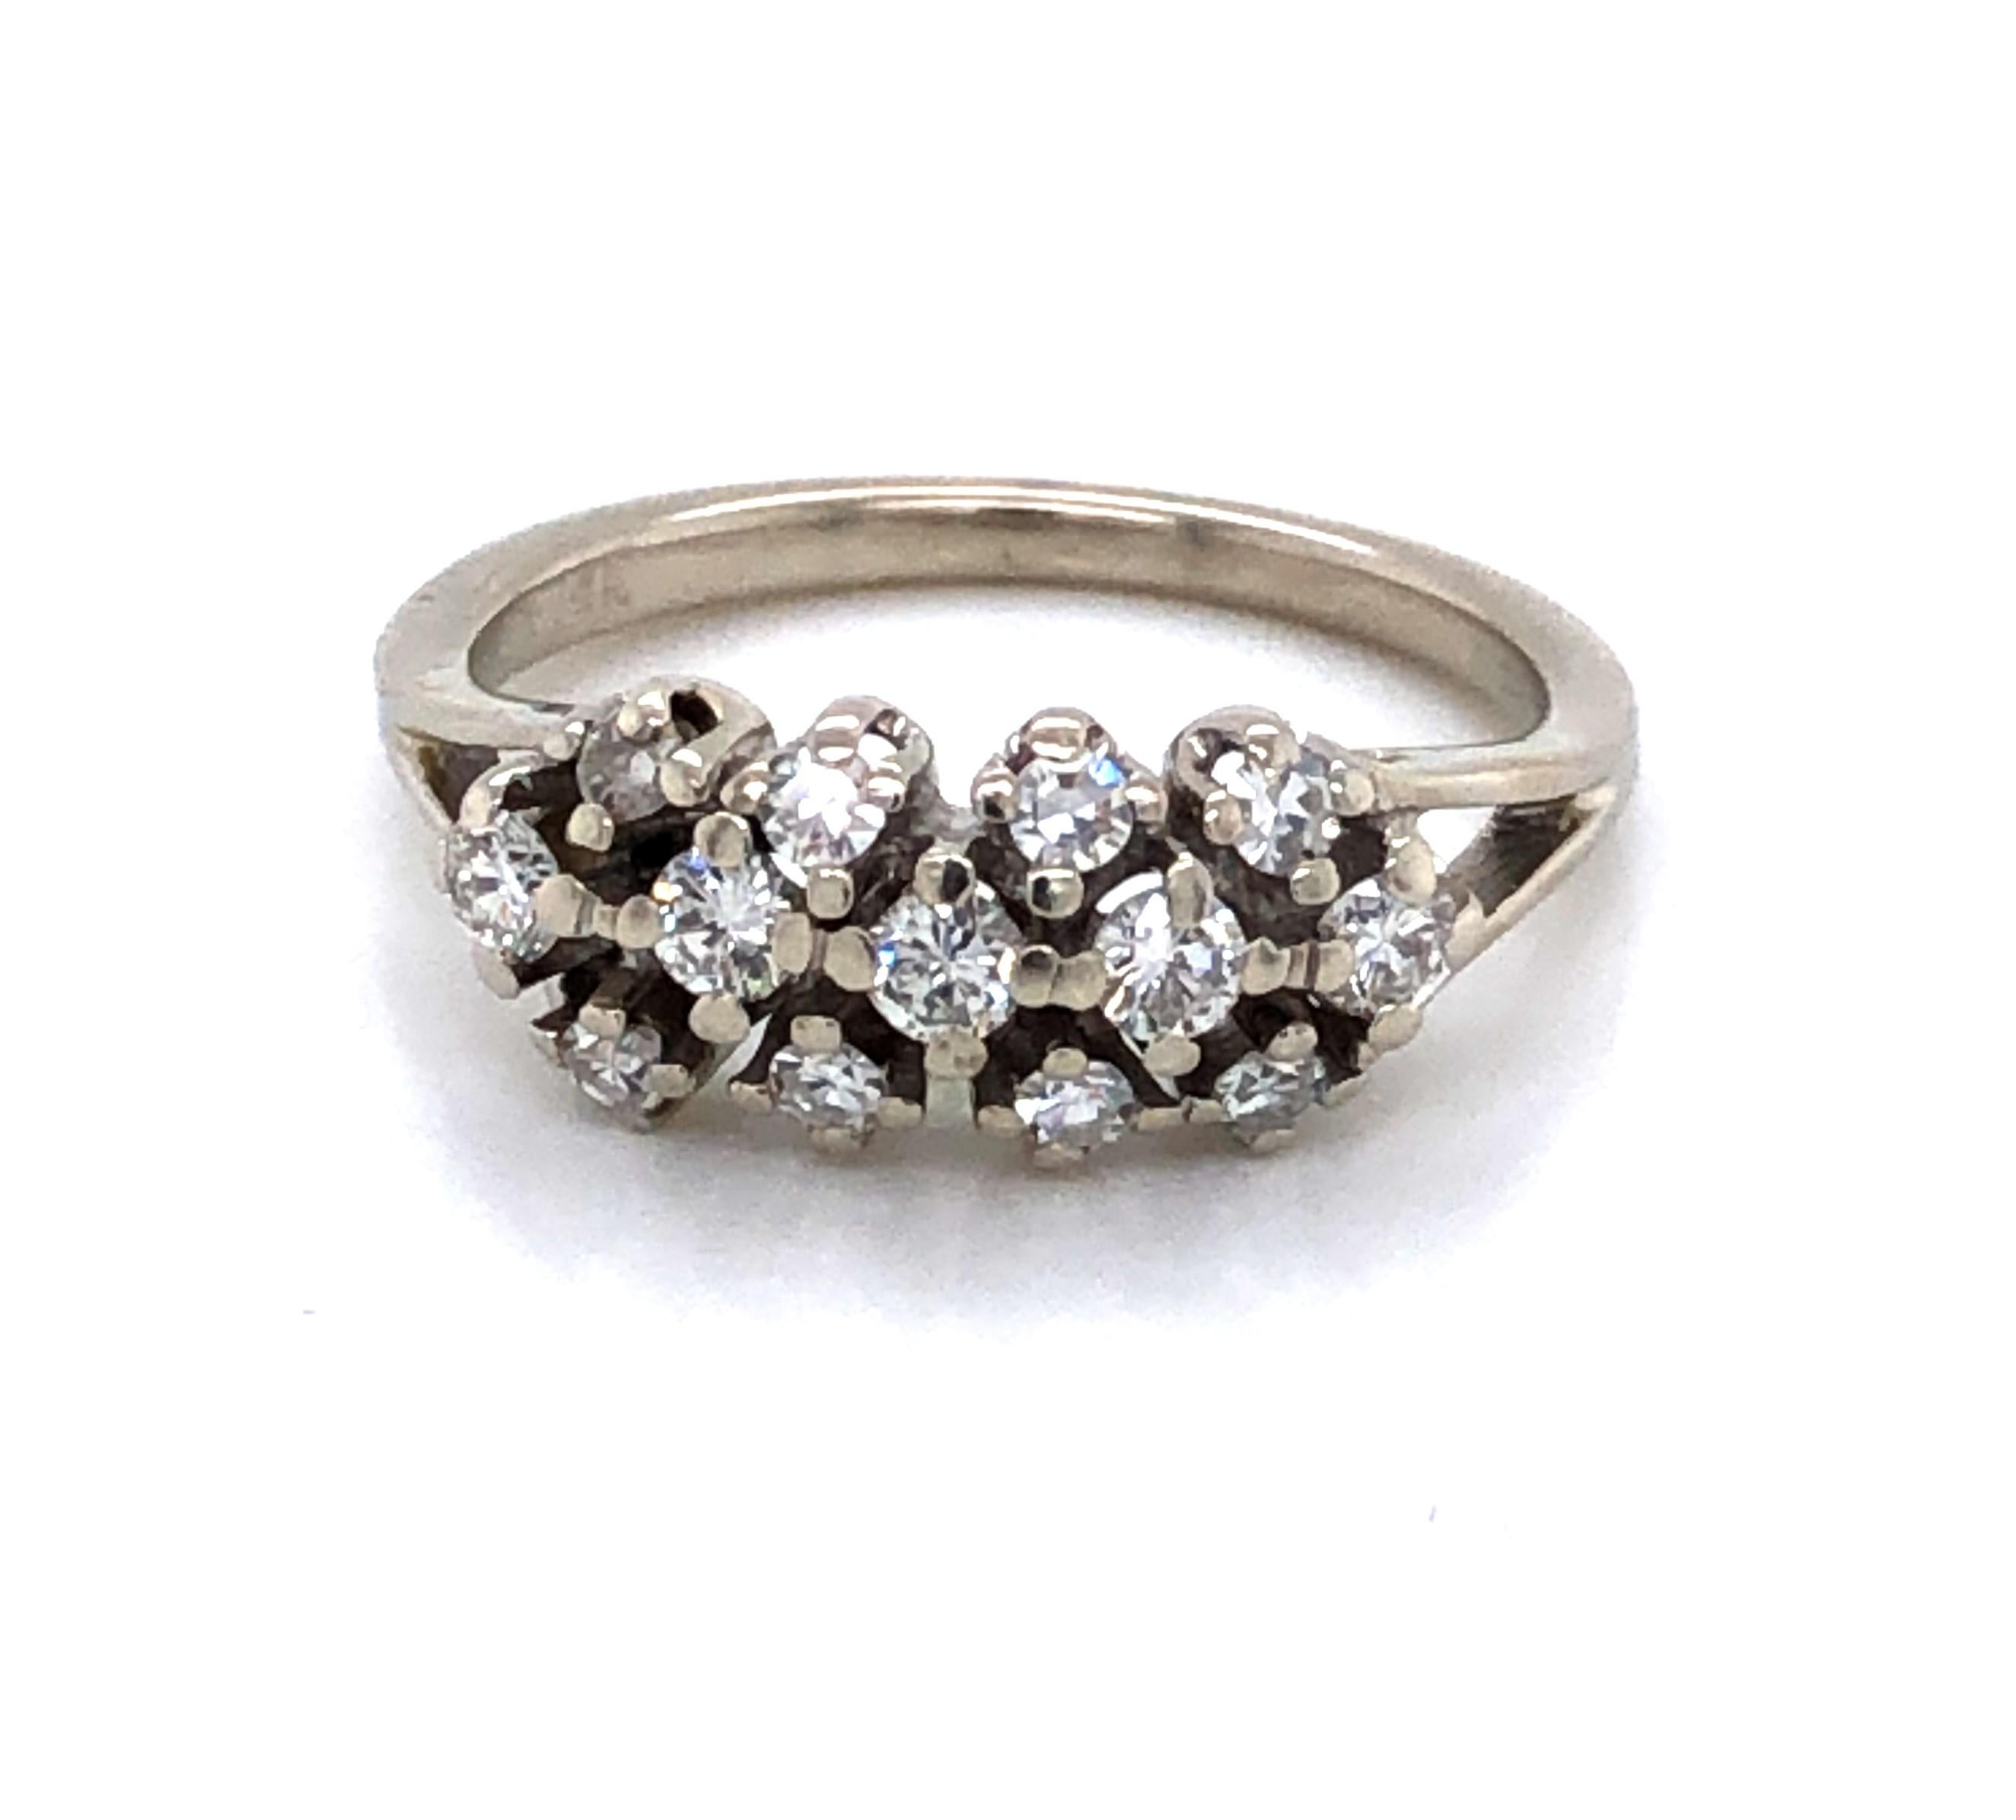 Treat yourself and brighten your day or surprise that special someone to mark an occasion with this sparkler. Thirteen brilliant H/SI diamonds, with a total carat weight of .41 carats, are bezel set and arranged in an attractive and impactful